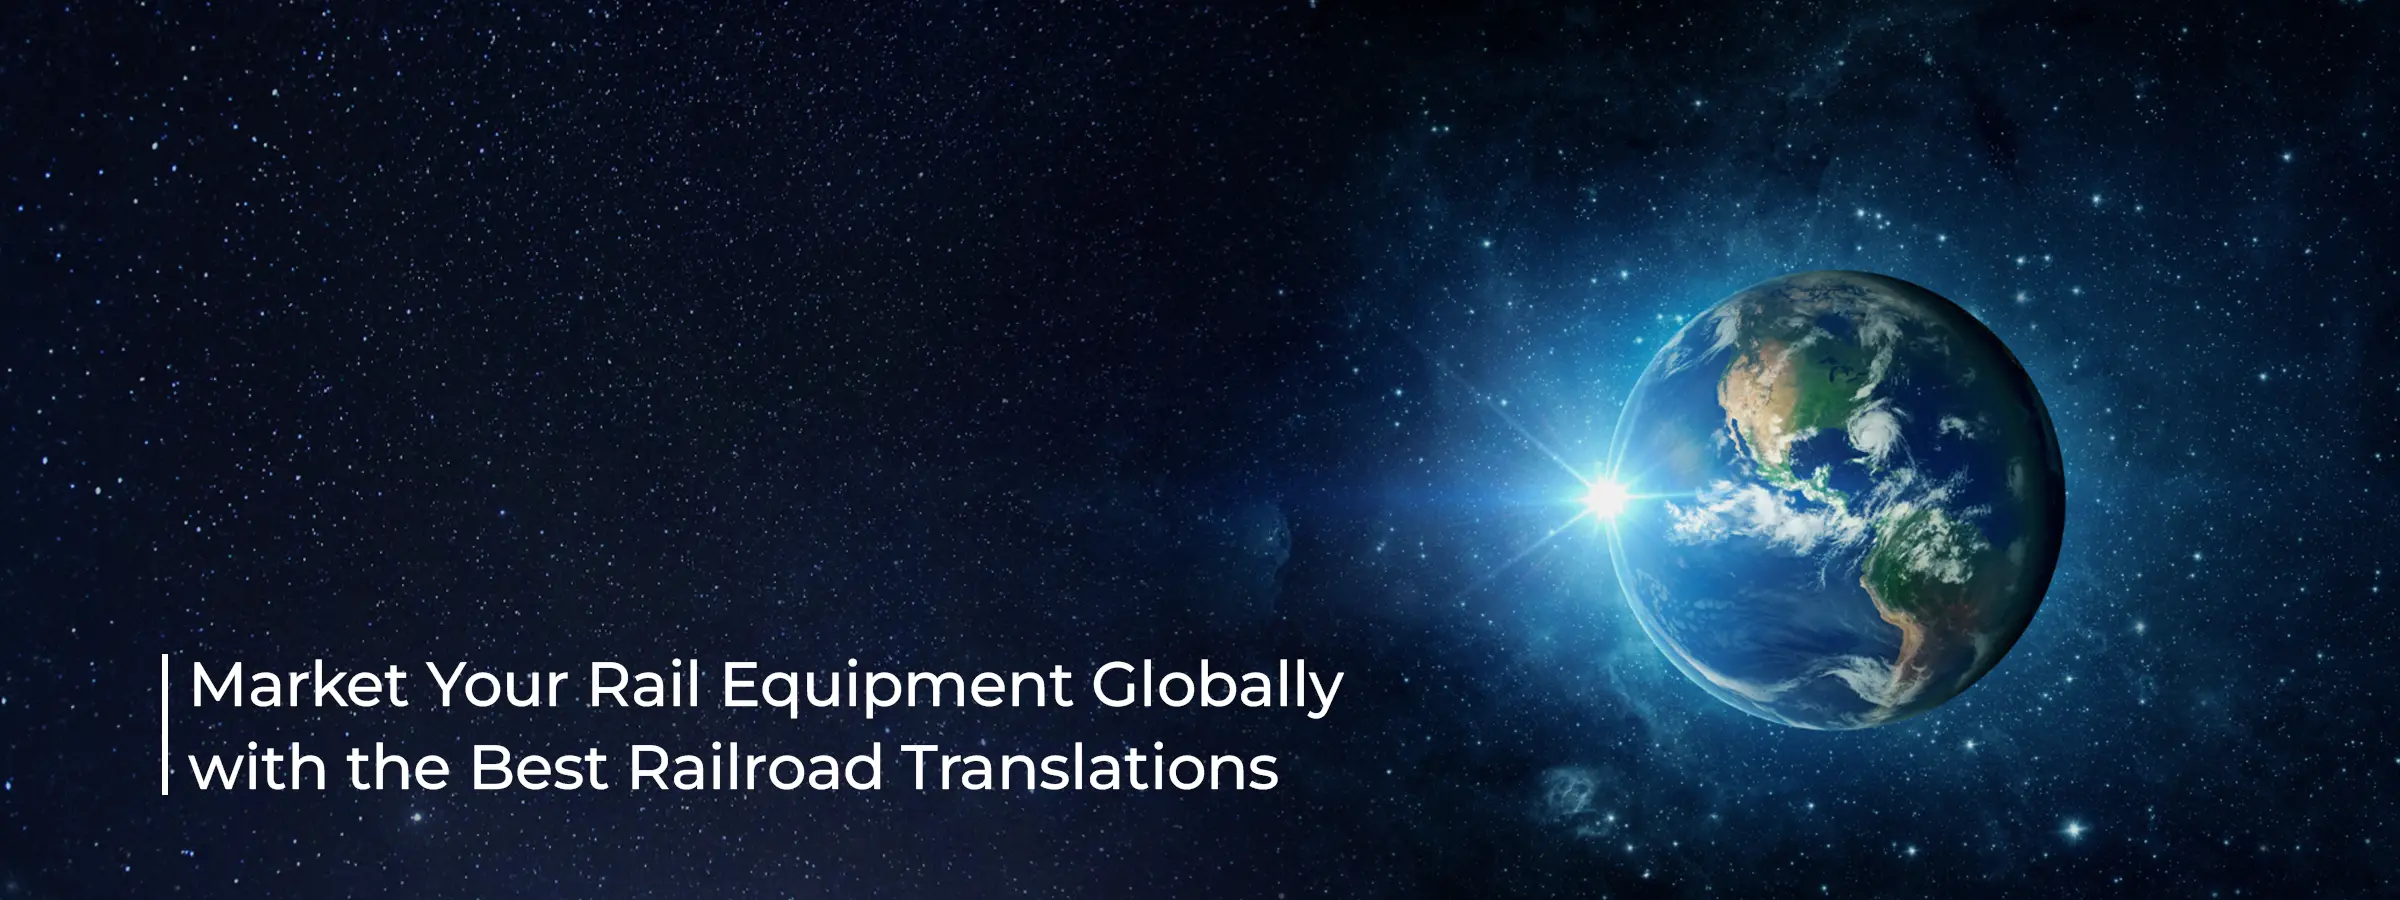 market-your-rail-equipment-globally-with-the-best-railored-translations-industry